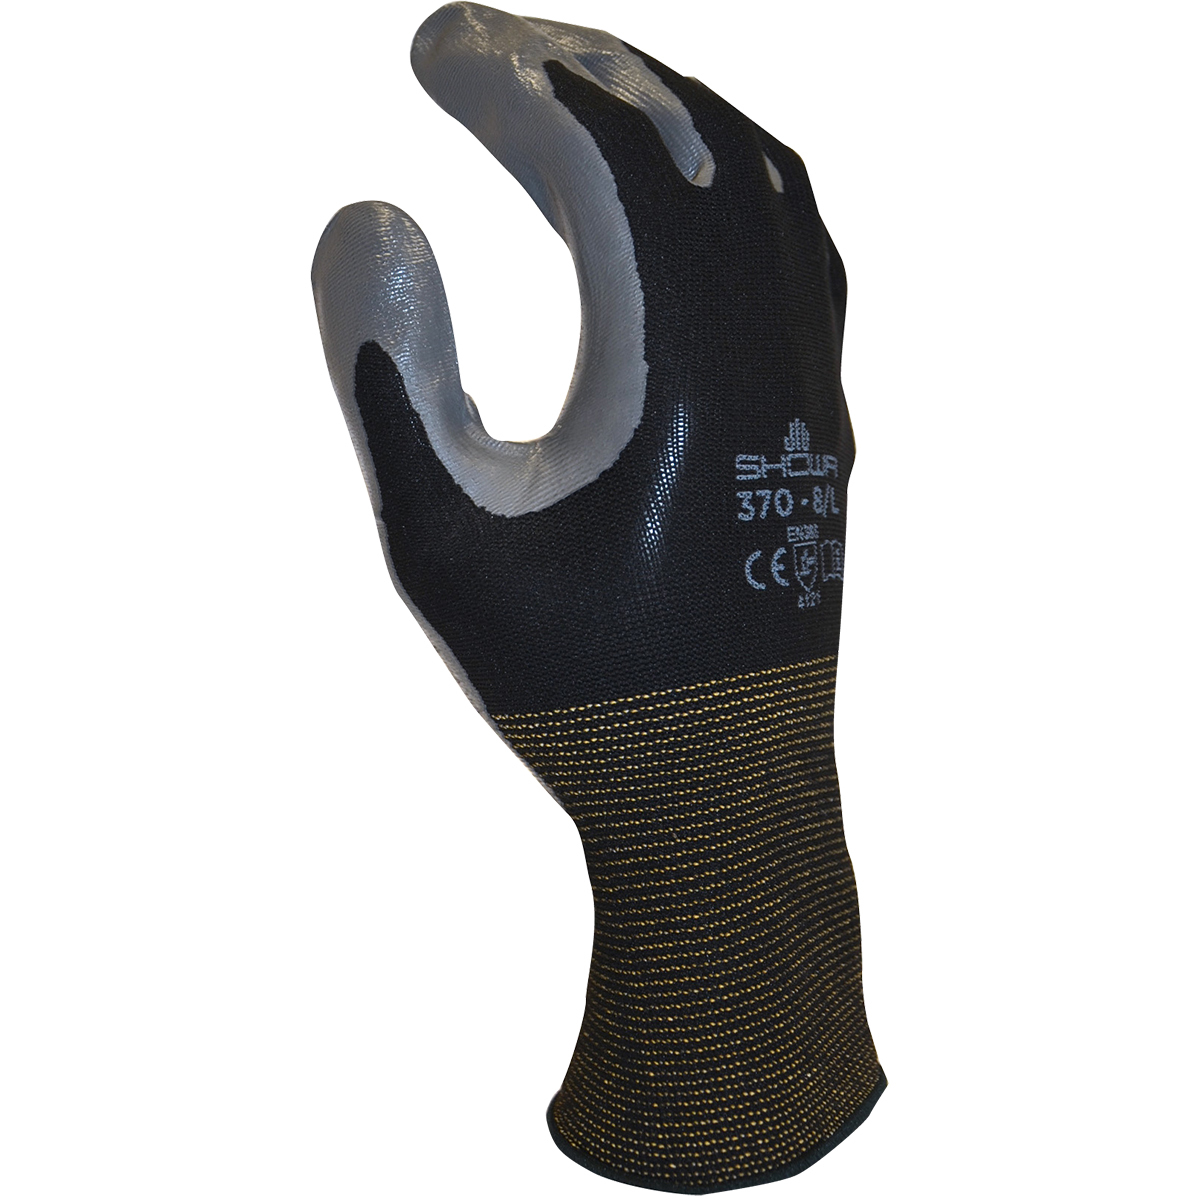 SHOWA® ATLAS® 13 Gauge Nitrile Palm Coated Work Gloves With Nylon Knit Liner And Knit Wrist